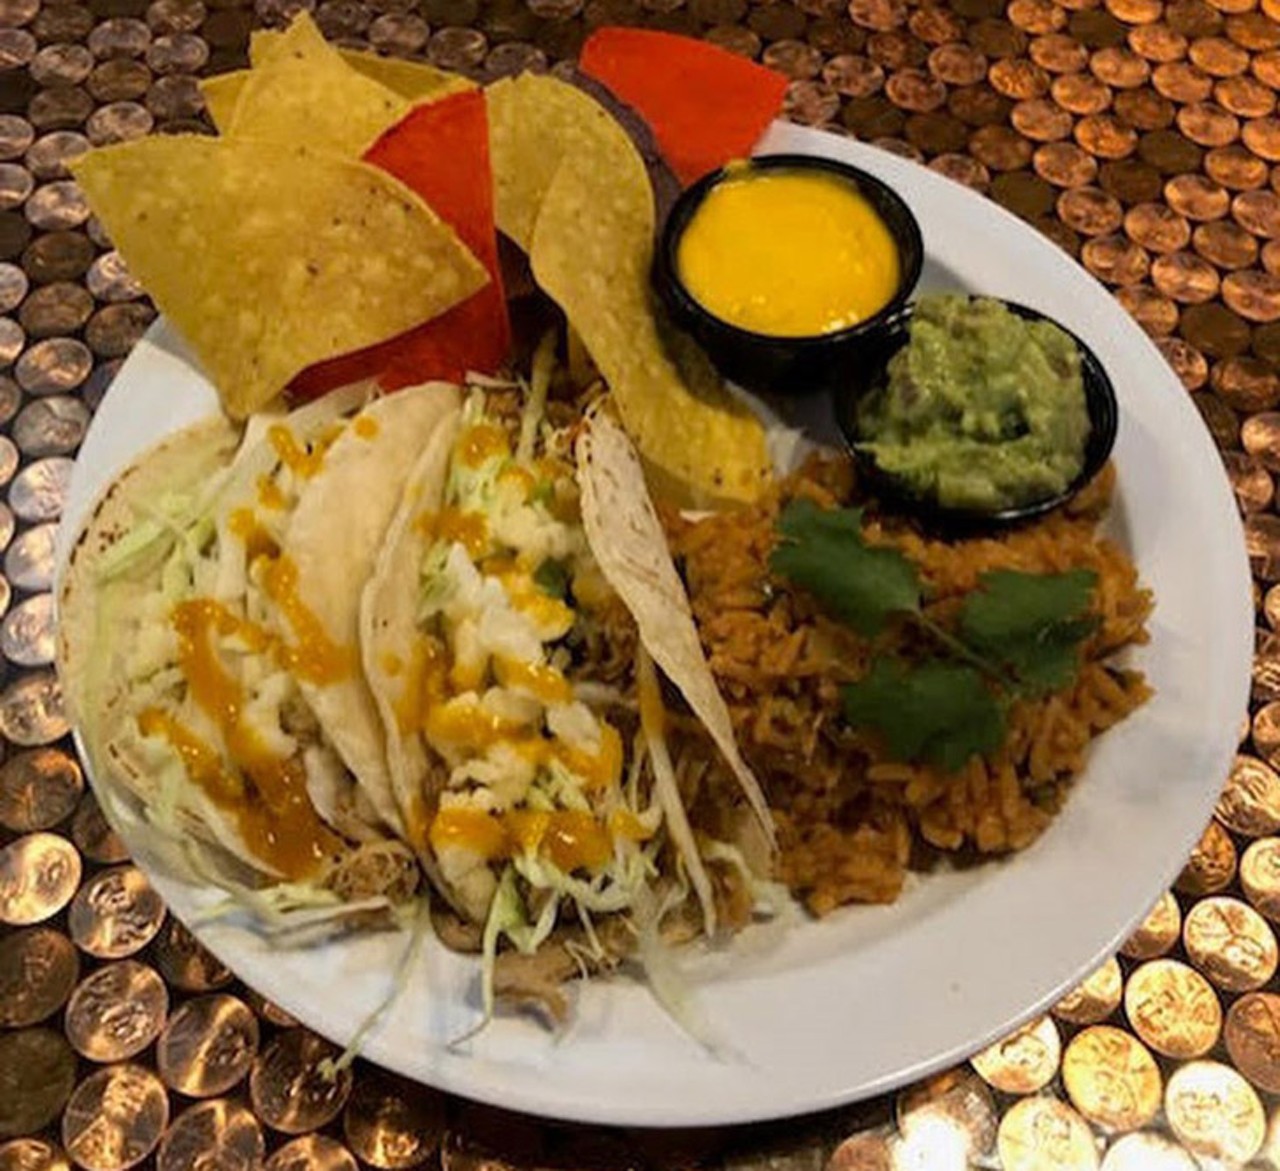 The Copper Rocket  
106 Lake Ave., Maitland, FL 32751, 407-853-5036
Two Chicken Tinga Tacos- Mouthwatering chicken tinga tacos served on flour tortillas with slivered green cabbage and cotija cheese, Mexicali rice, and tri colored tortilla chips served with guacamole and nacho cheese dipping sauce.
Photo via The Copper Rocket